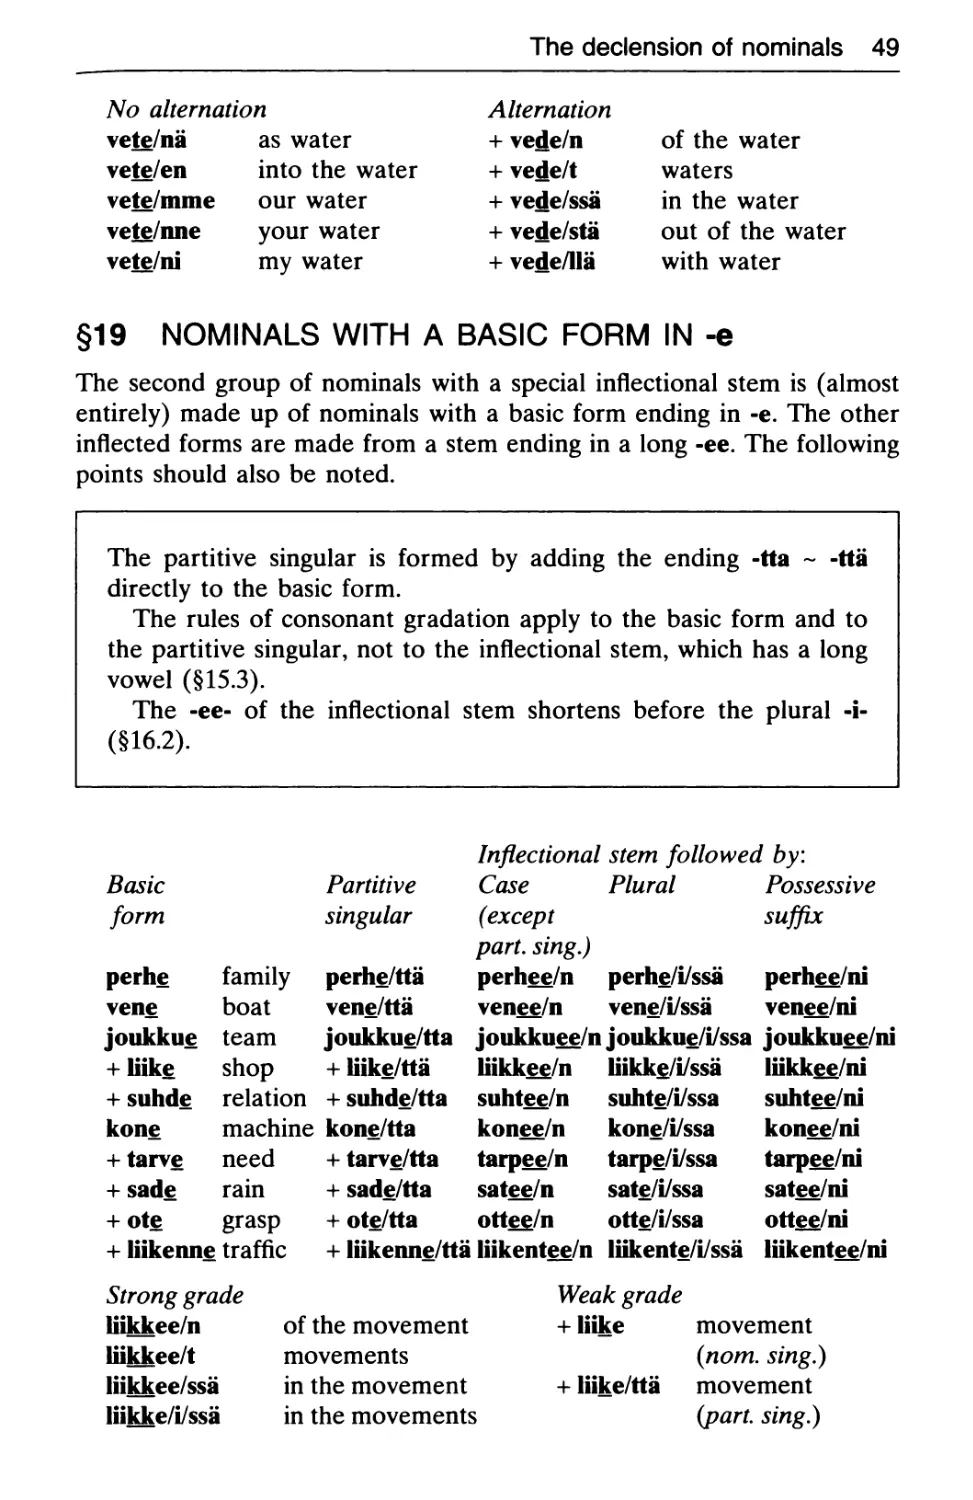 §19 Nominals with a basic form in -e